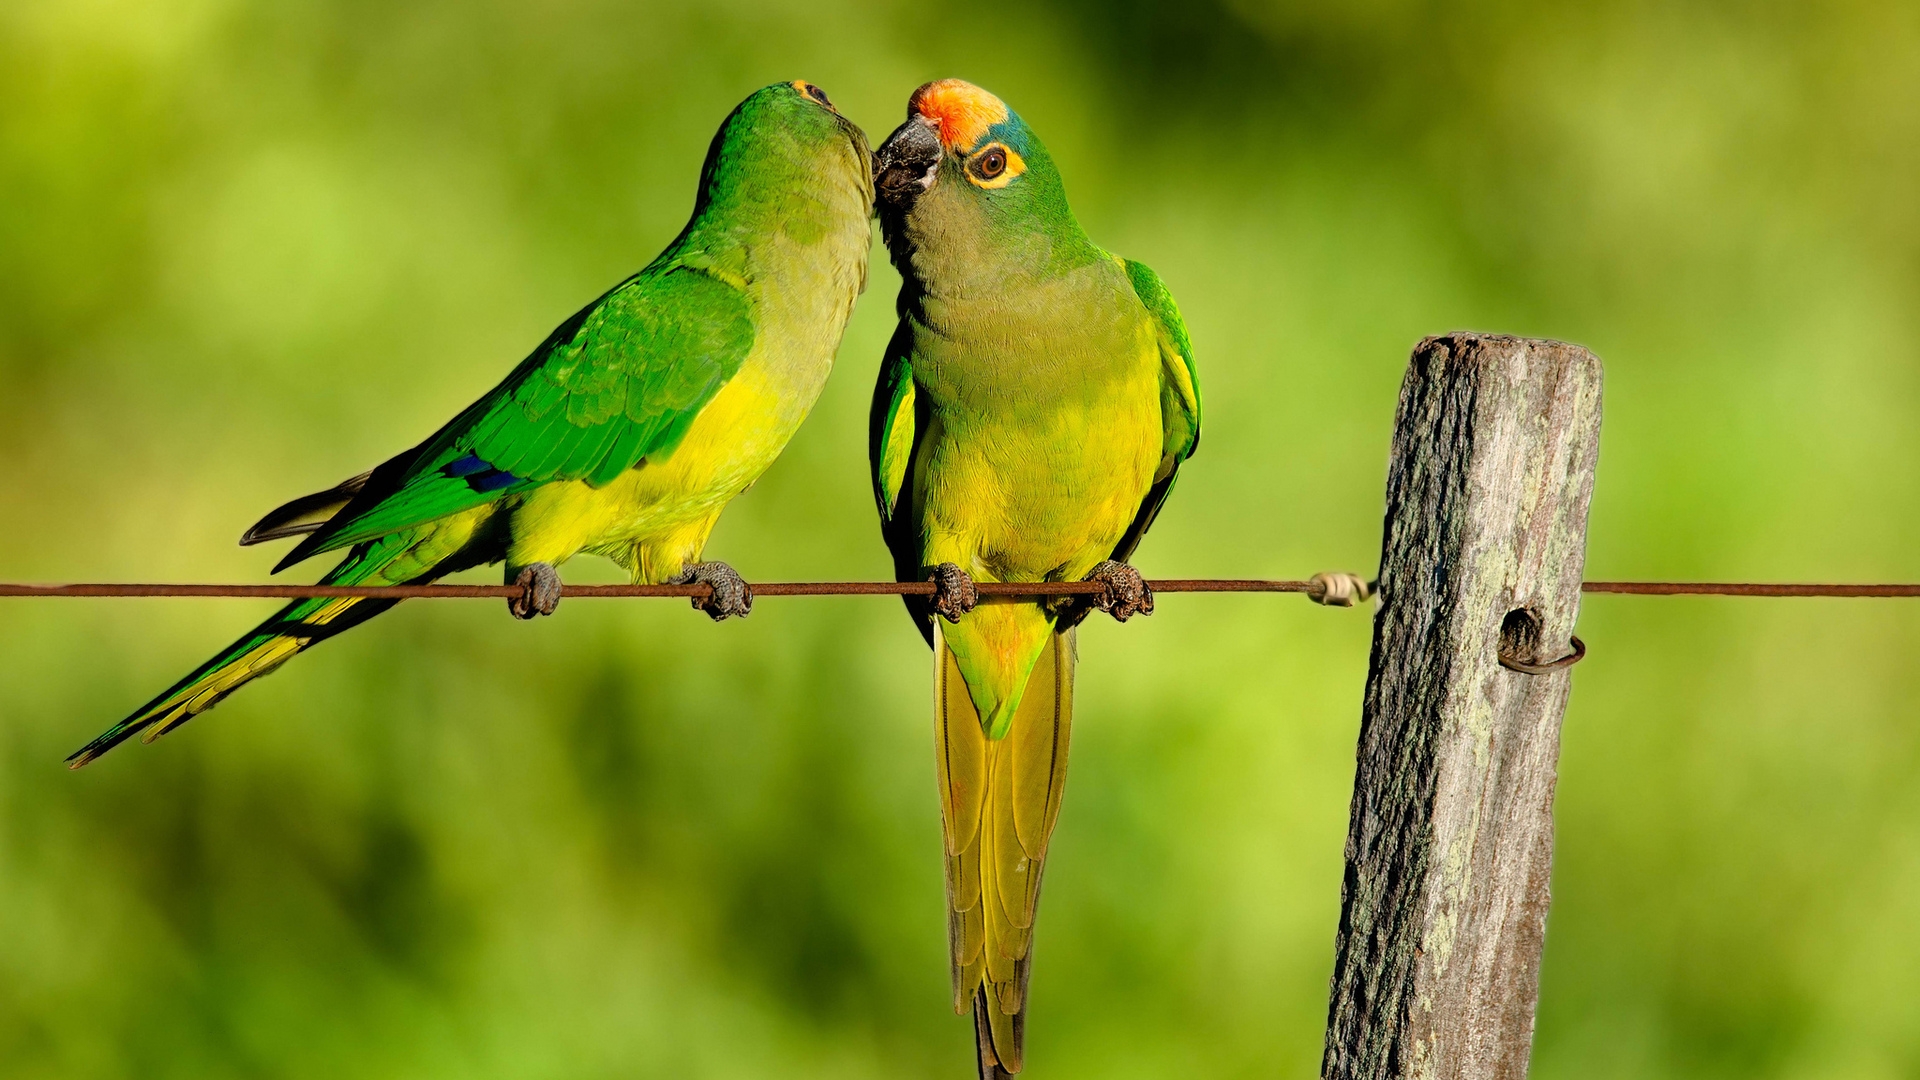 Parrots Kiss for 1920 x 1080 HDTV 1080p resolution